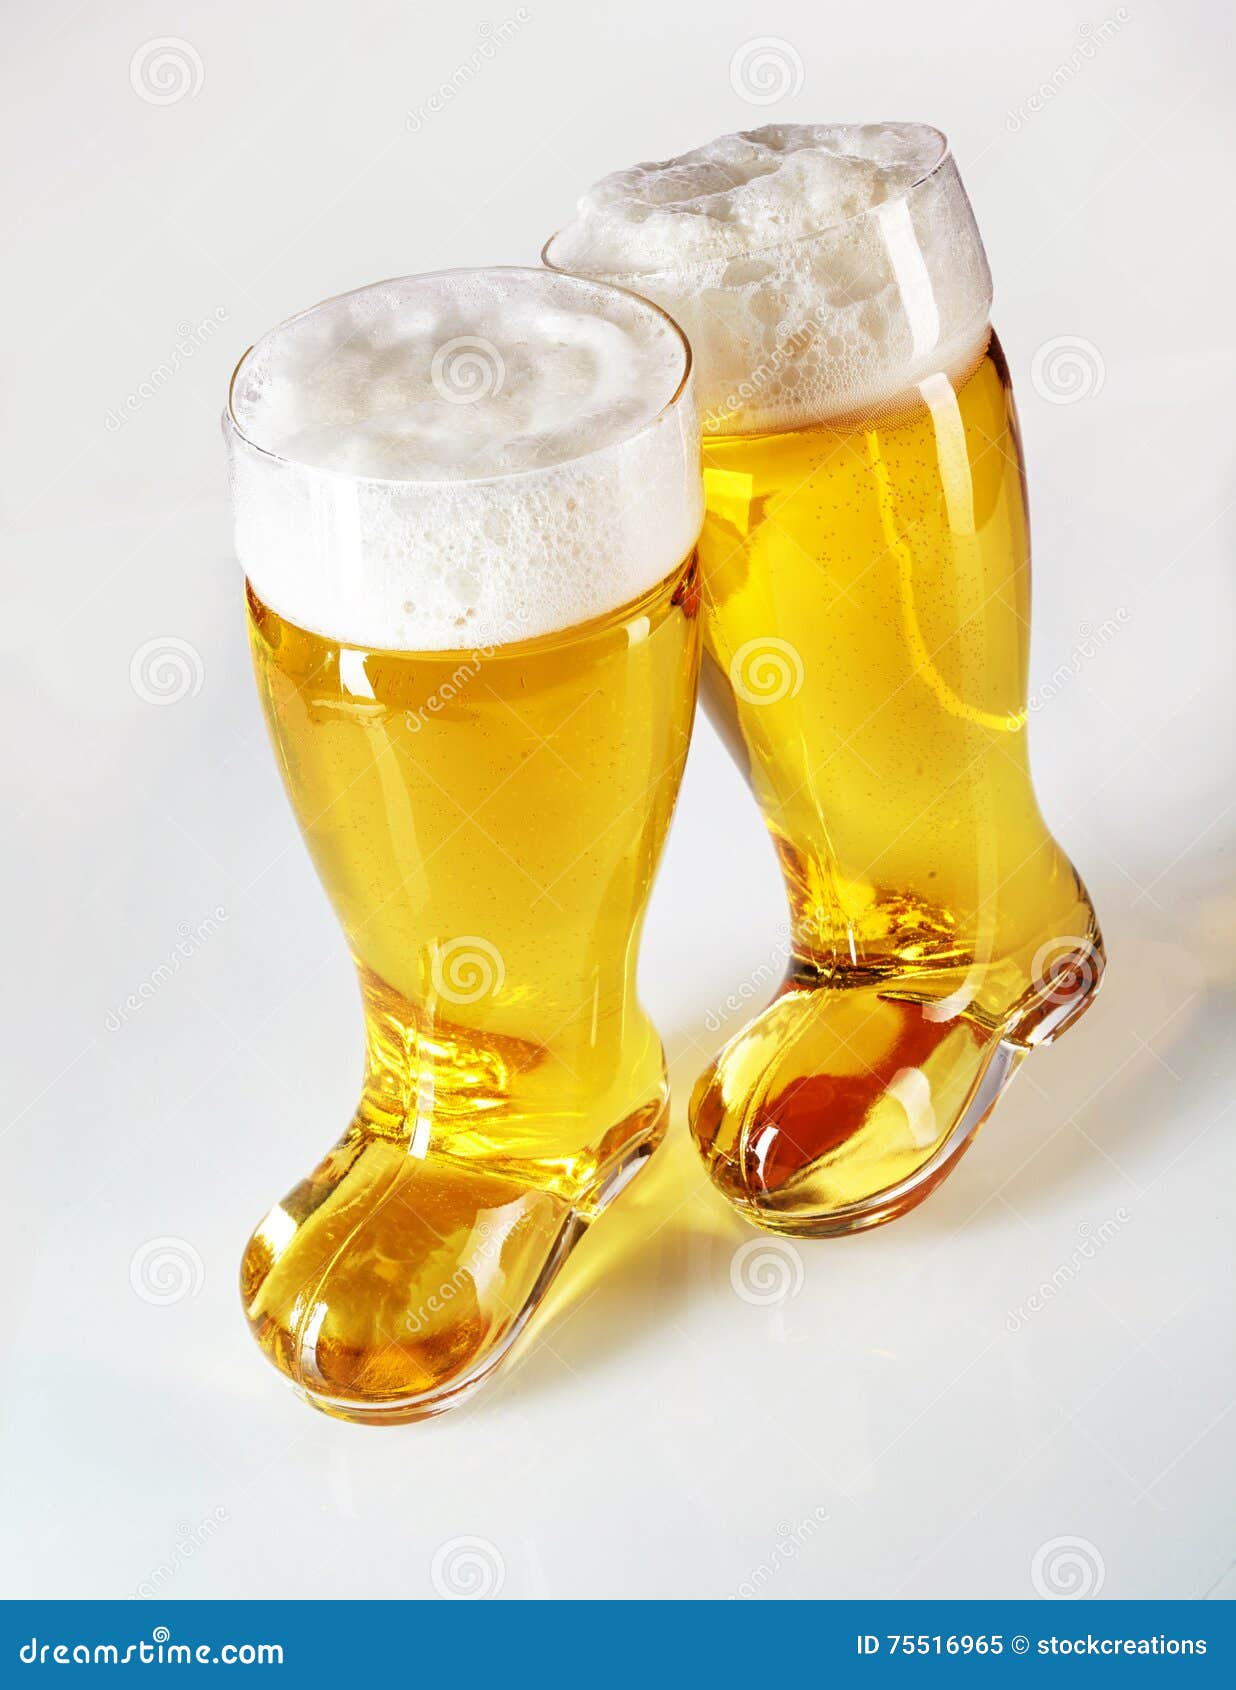 https://thumbs.dreamstime.com/z/boot-shaped-beer-glasses-filled-frothy-lager-fun-golden-white-background-conceptual-munich-oktoberfest-75516965.jpg